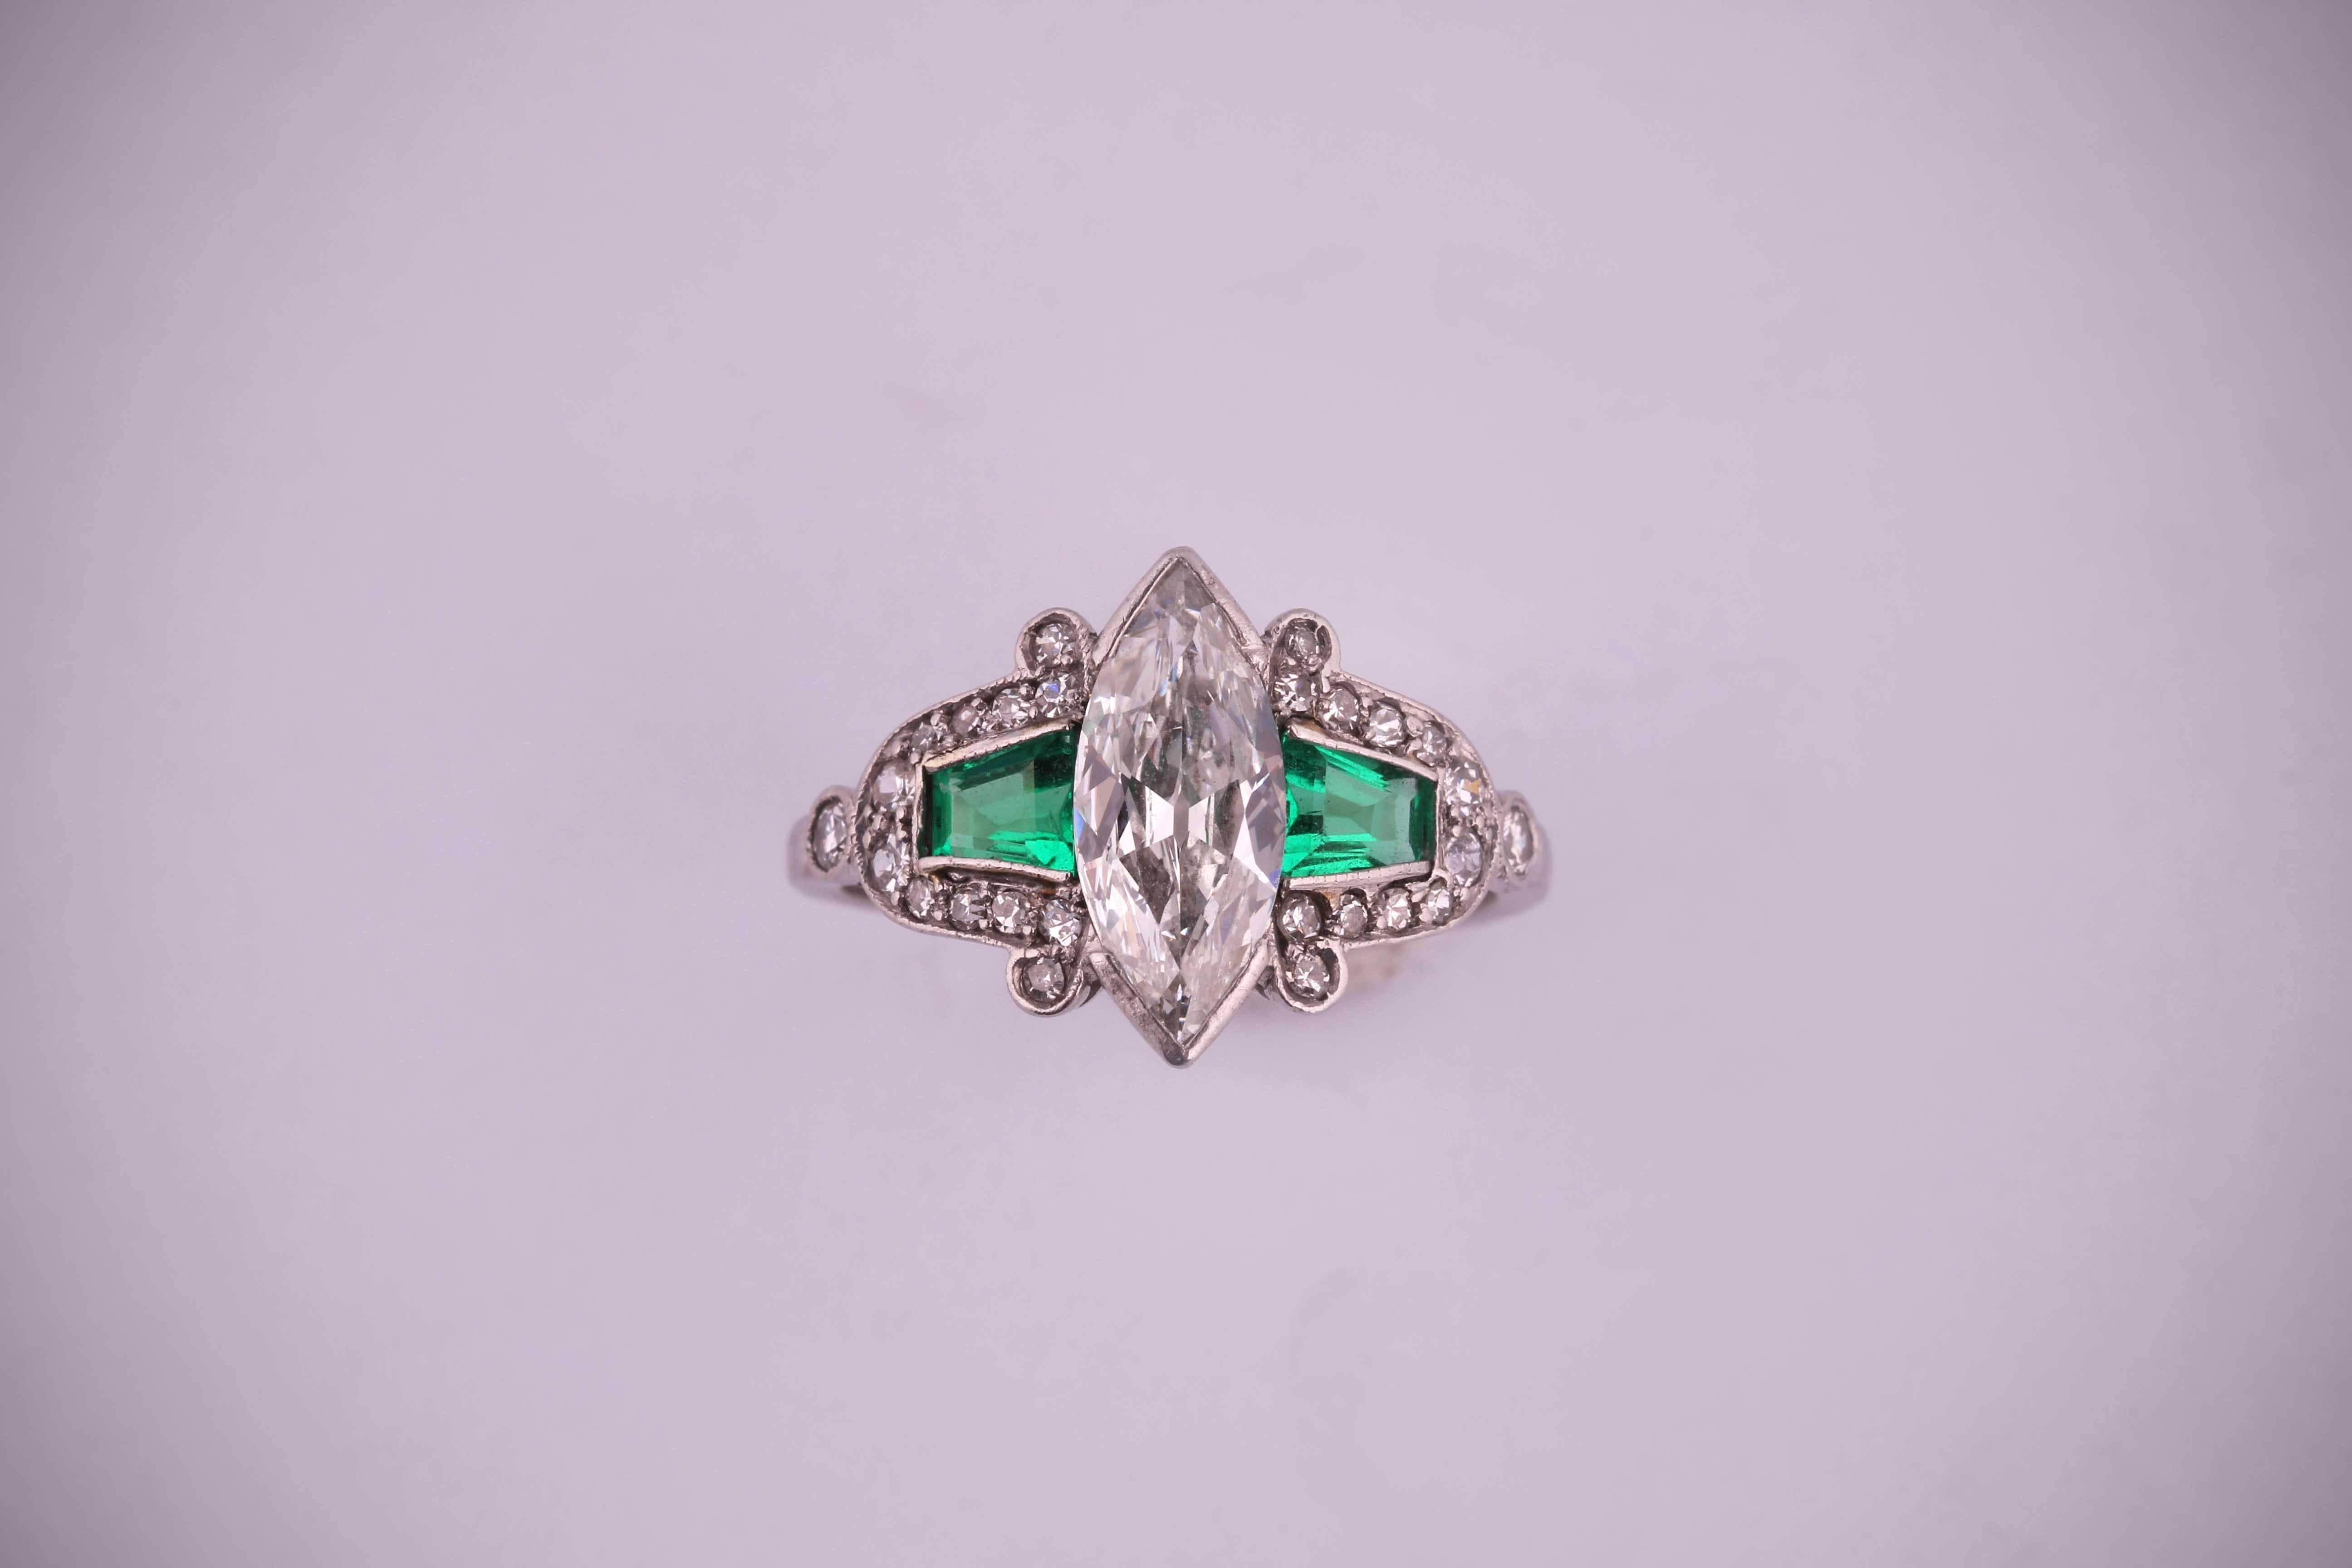 Platinum (tested) ring with a central marquise shape diamond, round 8/8 diamonds and 2 natural trapezoidal shape step cut emeralds. 1910-1920 circa
Marquise diamond: 12.30 x 5.16 x 2.34 mm, 0.80/0.85 ct
Size: 6.25 (USA), 52. (Europe)
It can be